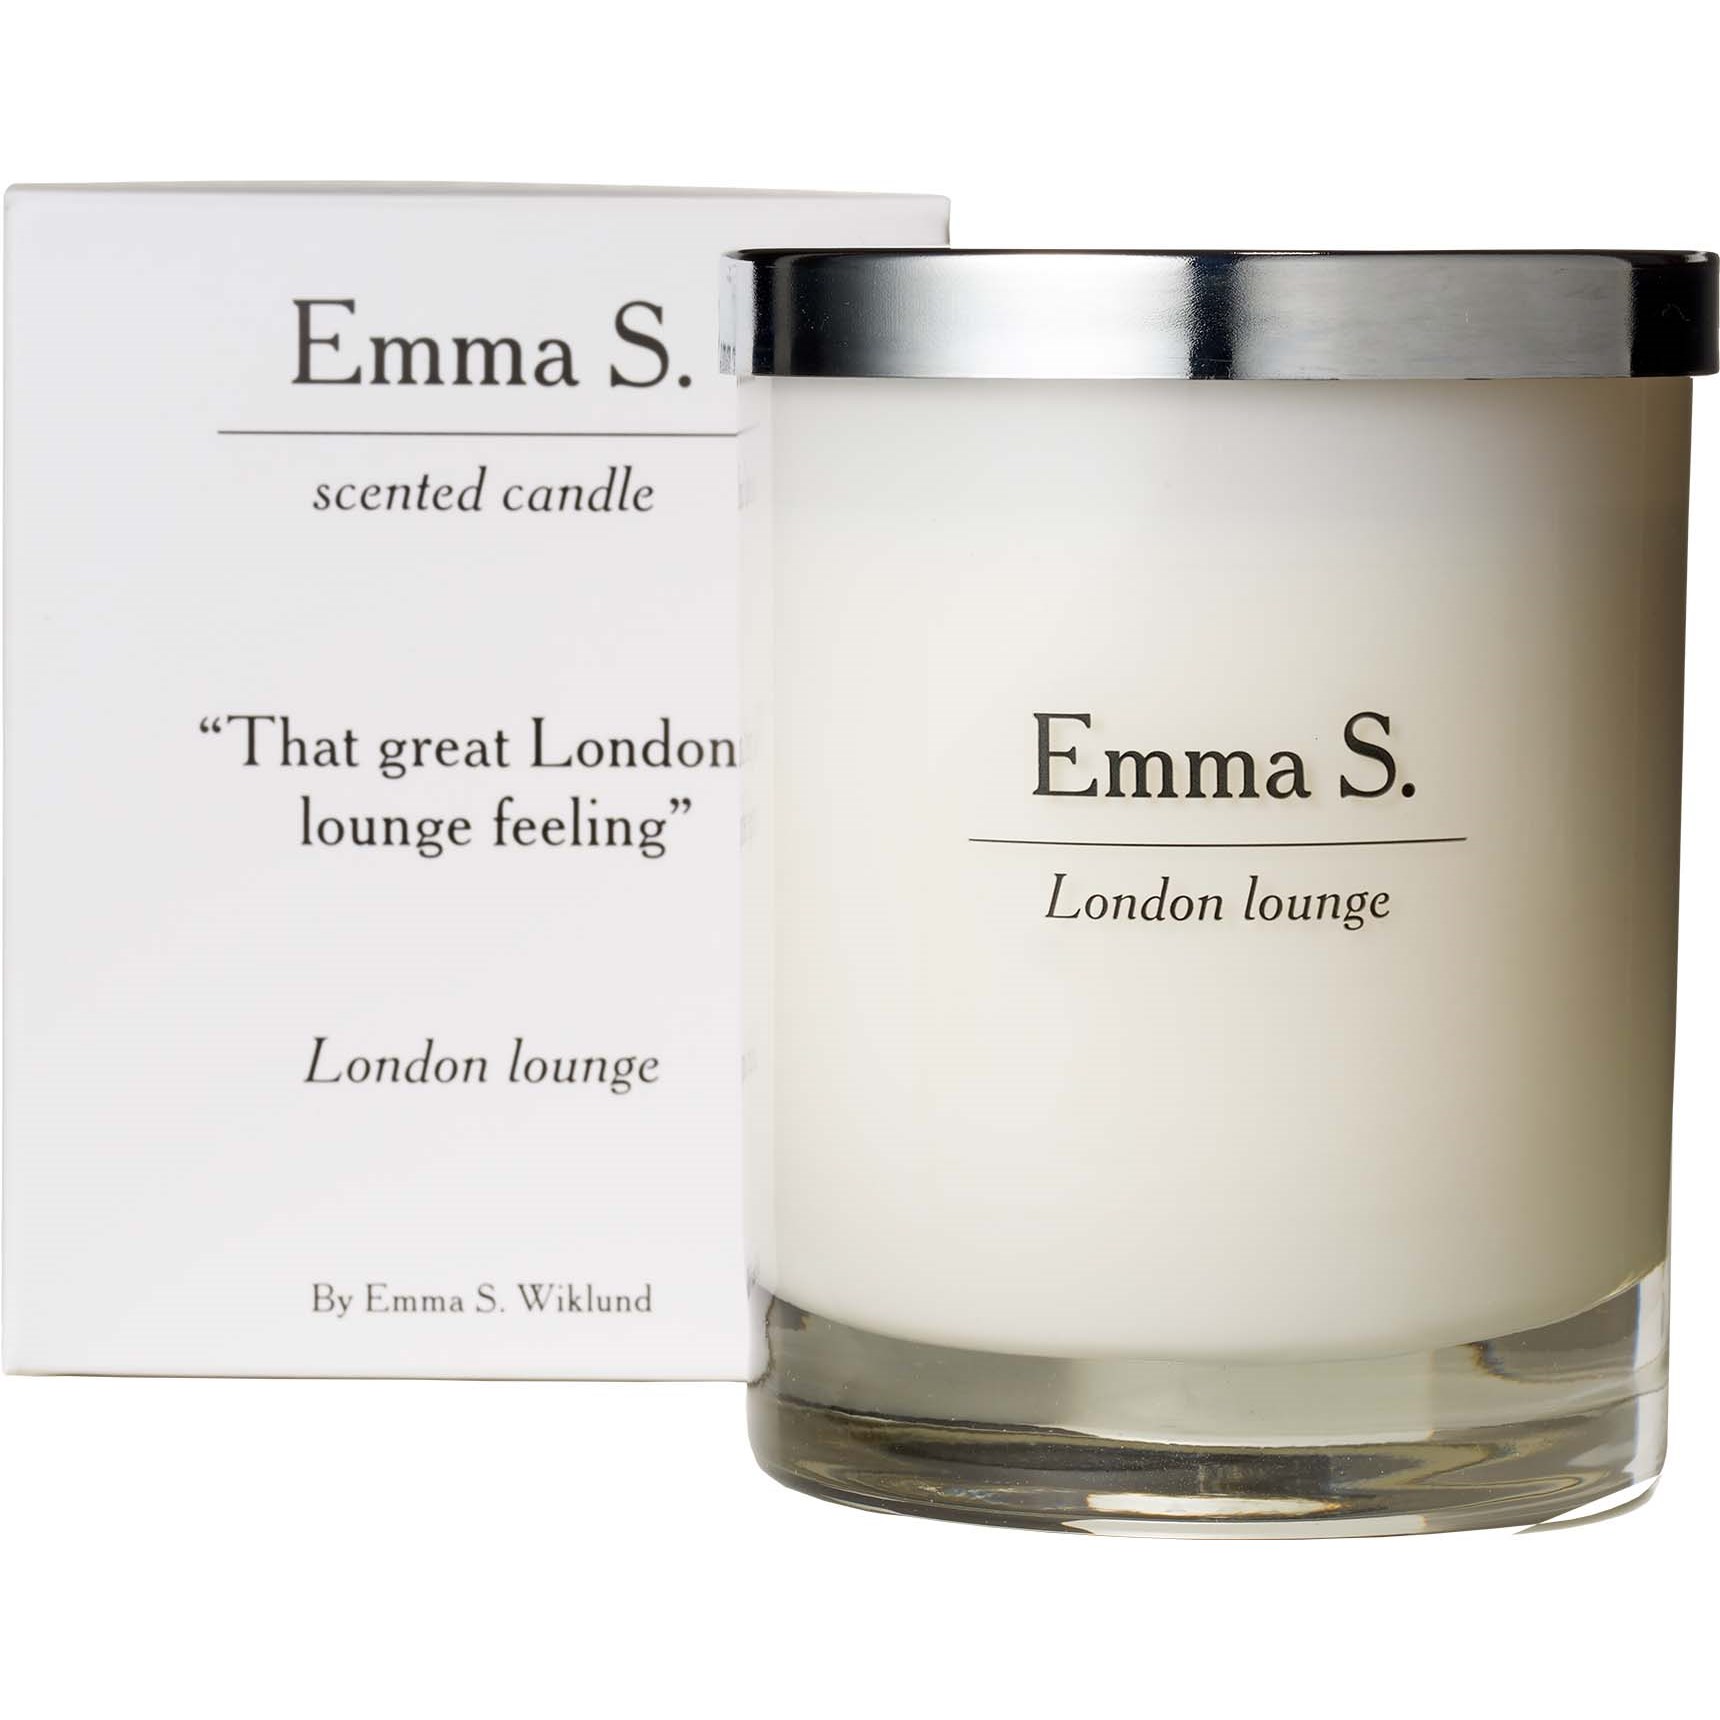 Emma S. London Lounge Scented Candle 233 g